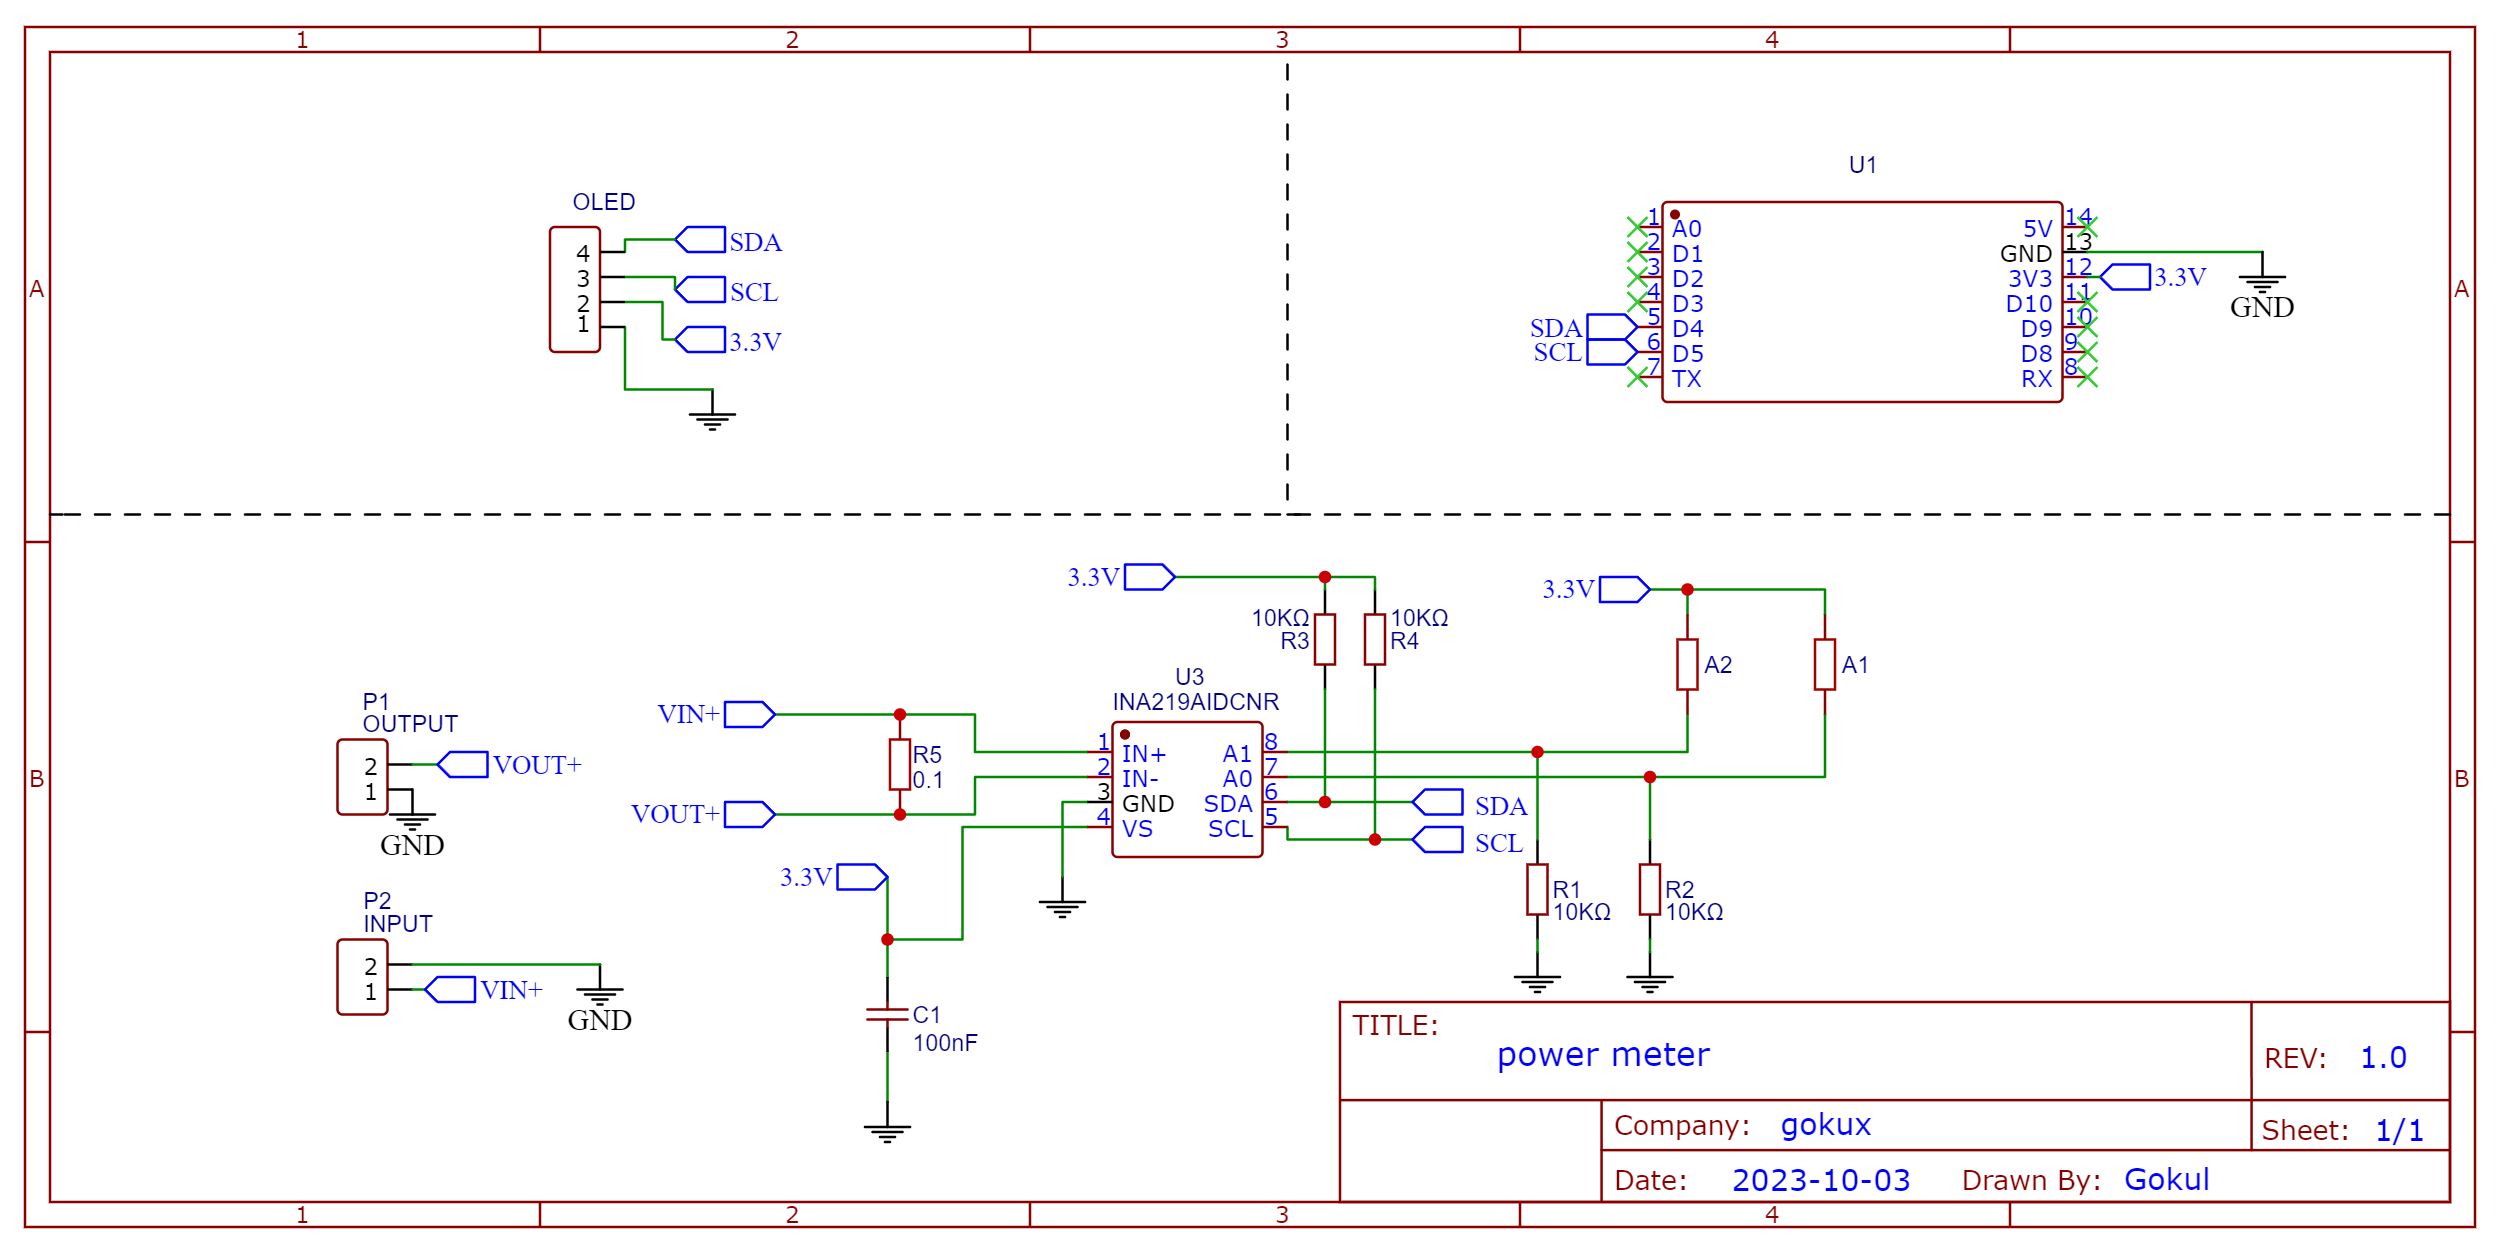 Schematic_seeed_2023-10-29 (1).png